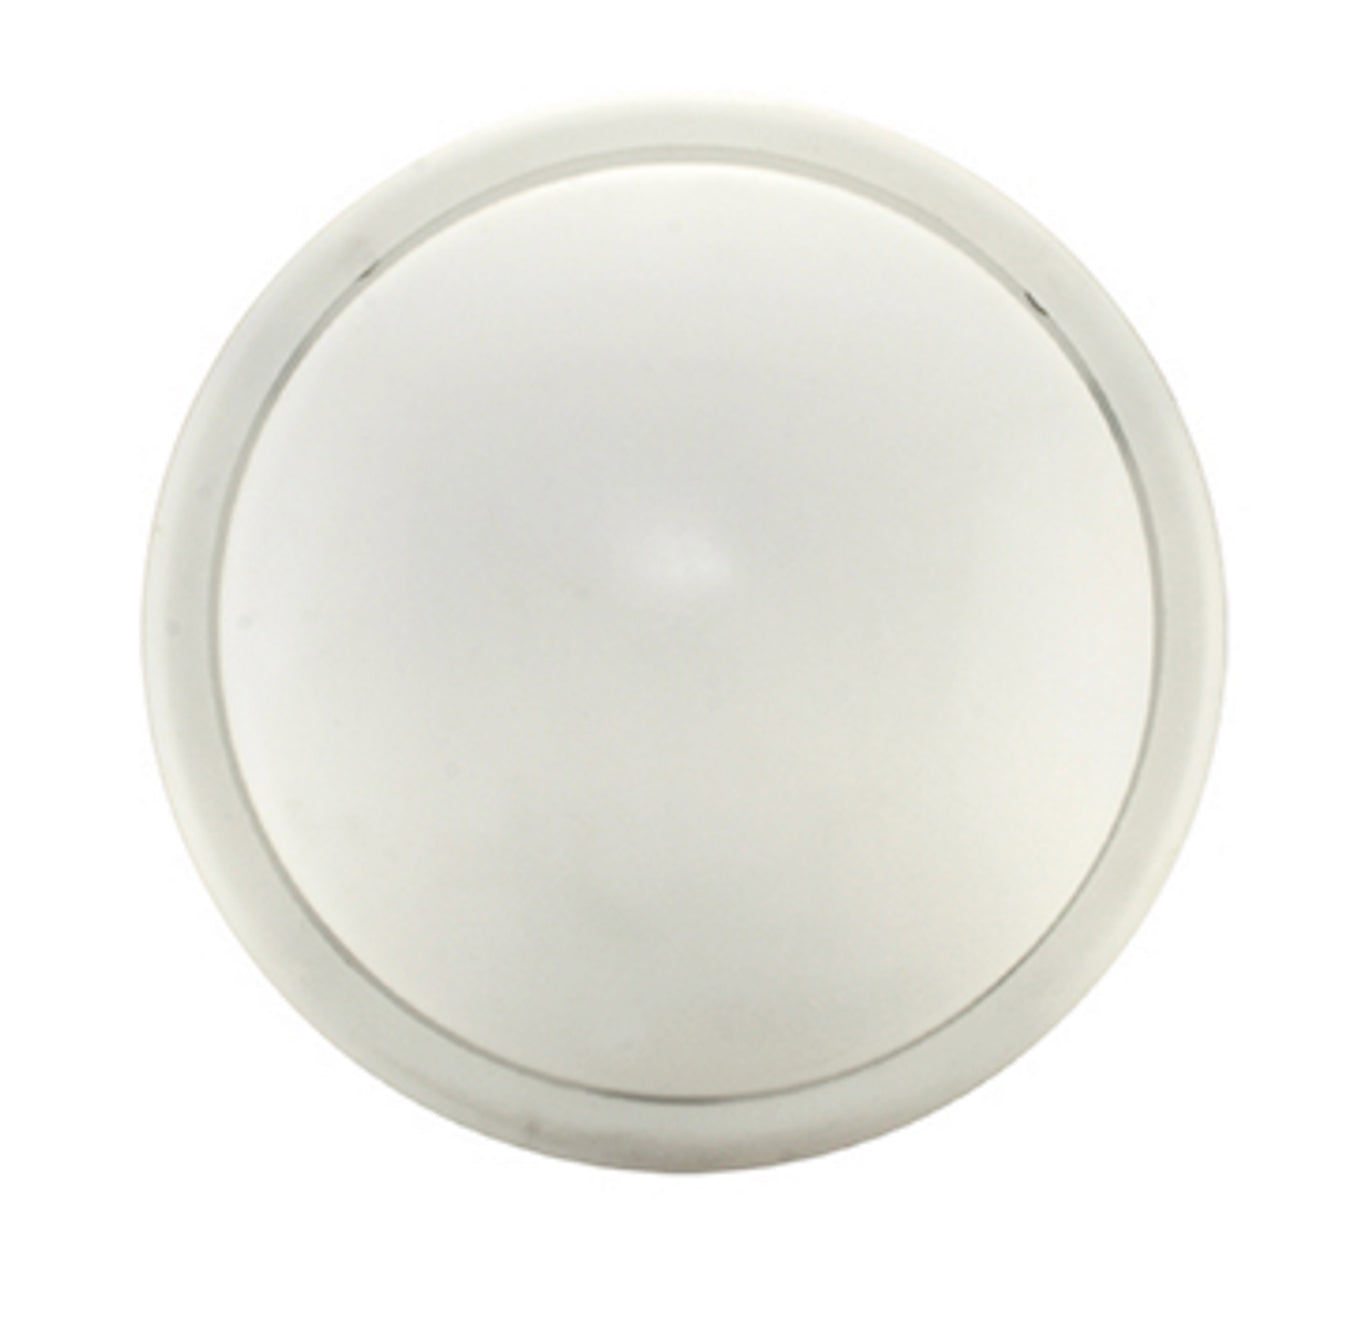 Circular LED Touch Light Mini Night Touch Light LED Puck Lights Portable Battery Operated Powered